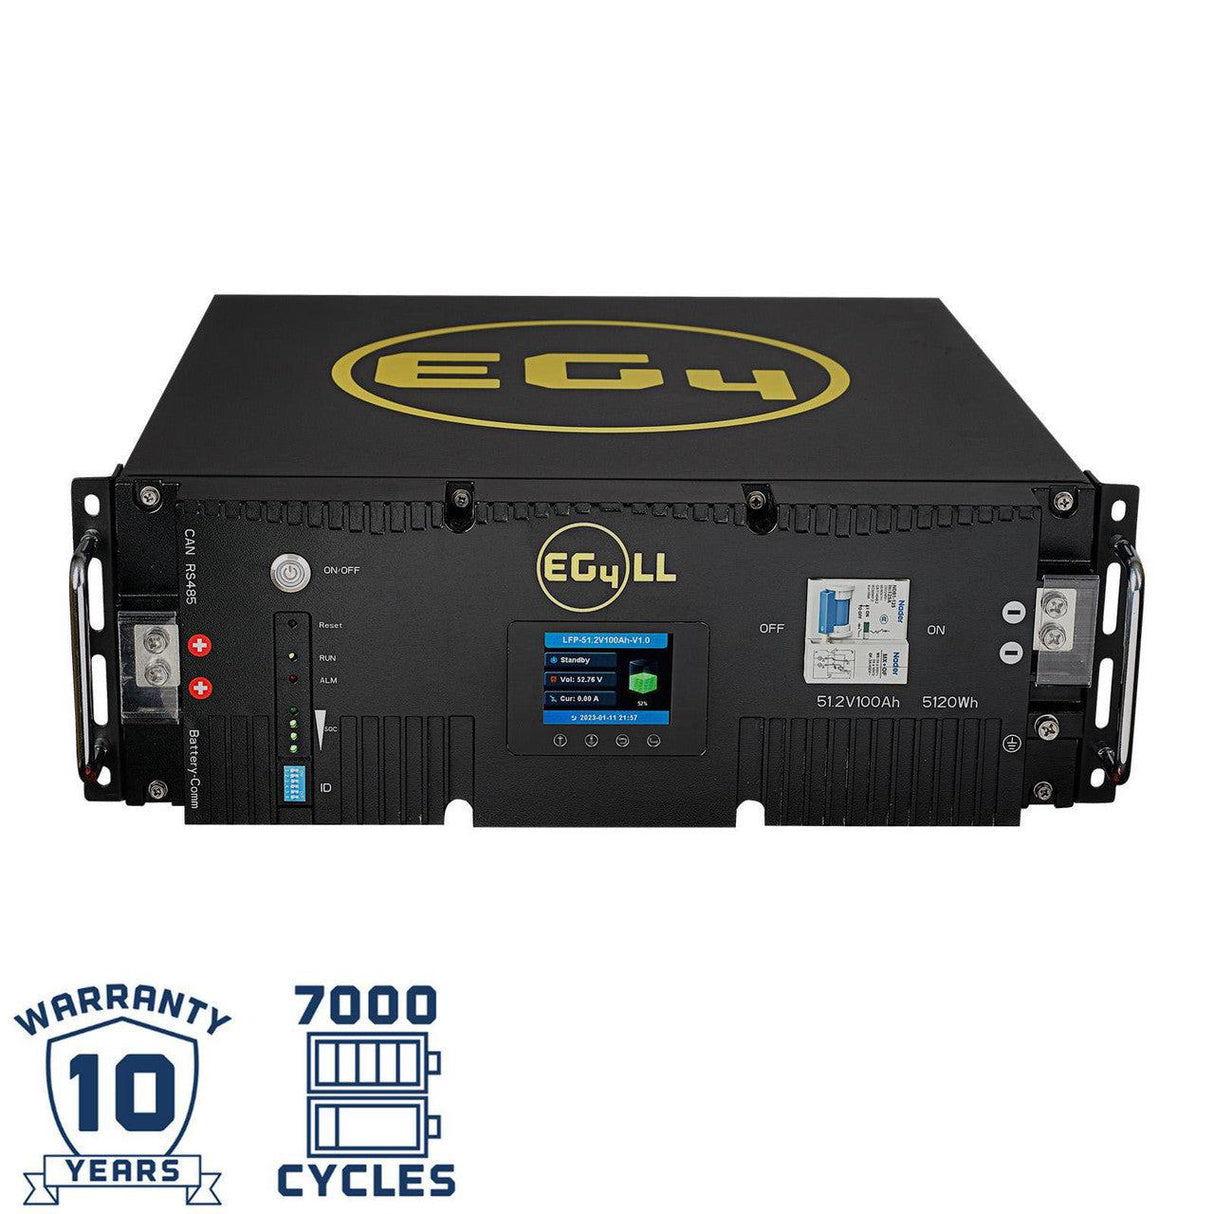 EG4 | LL Lithium Batteries Kit (V2) | 30.72kWh | 6 Server Rack Batteries With Pre-Assembled Enclosed Rack | With Door & Wheels | Busbar Covers